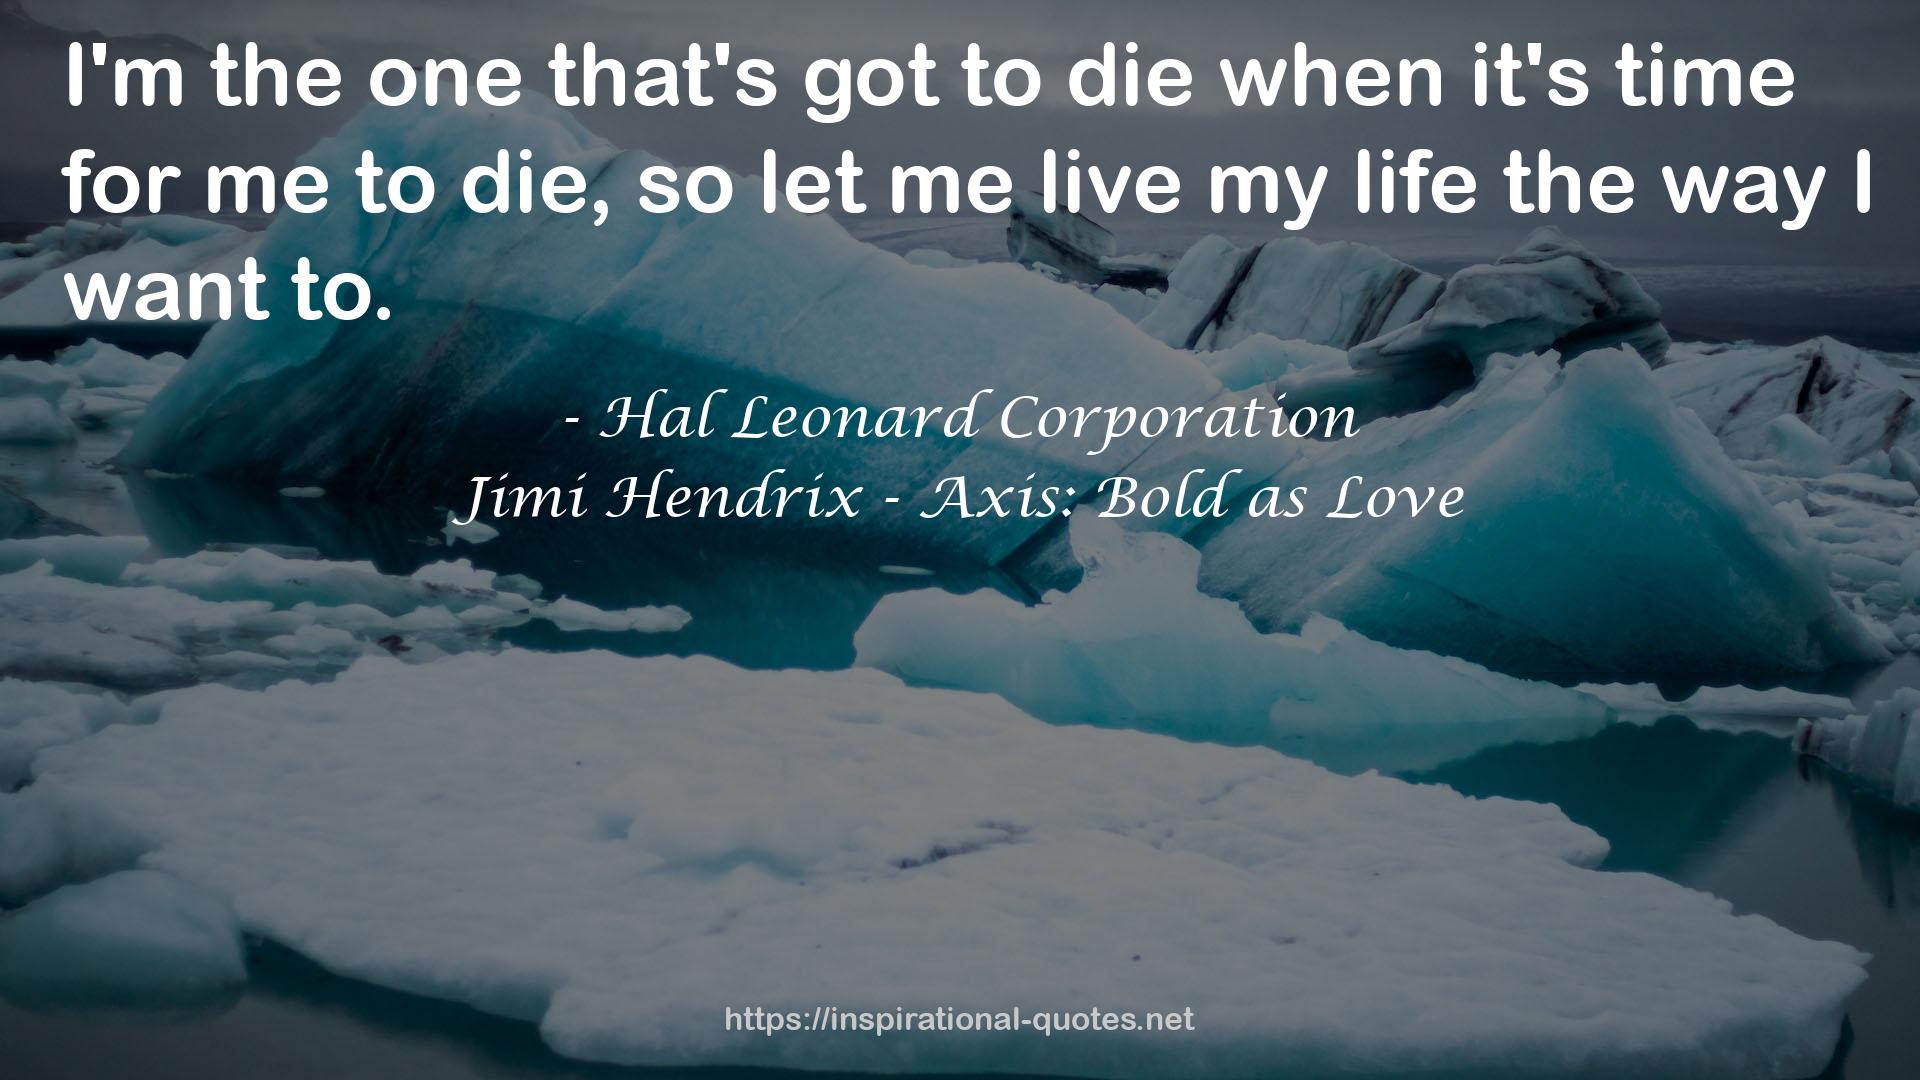 Jimi Hendrix - Axis: Bold as Love QUOTES